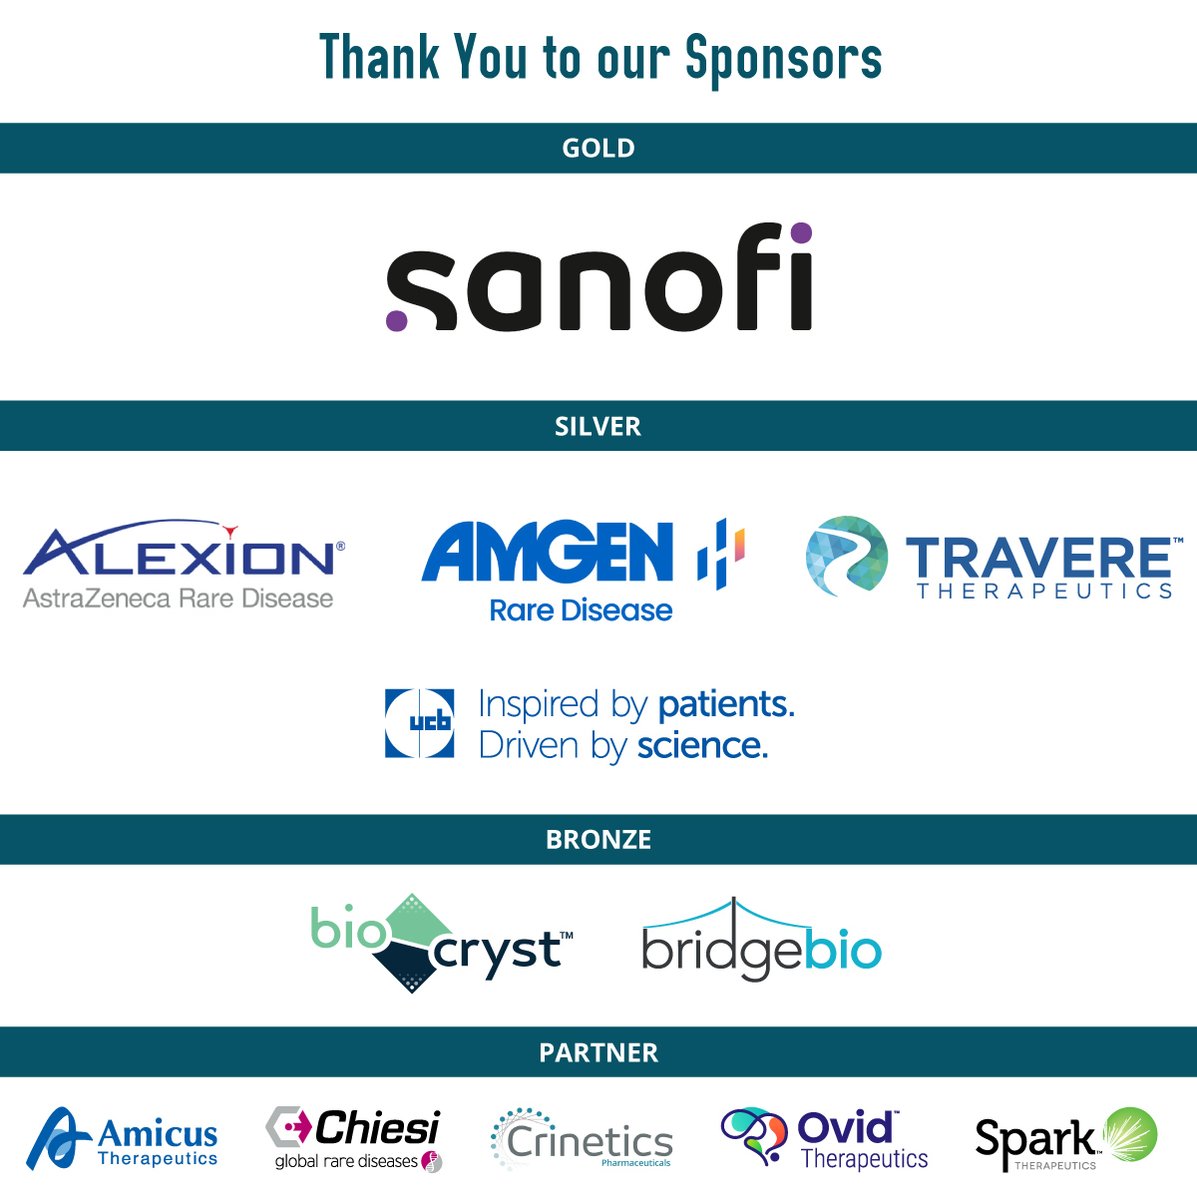 The RARE Drug Development Symposium is set to kick off in less than 24 hours. Thank you to this year's sponsors and partners for their support in bringing this event to life. #RDDS #RareDisease #CareAboutRare